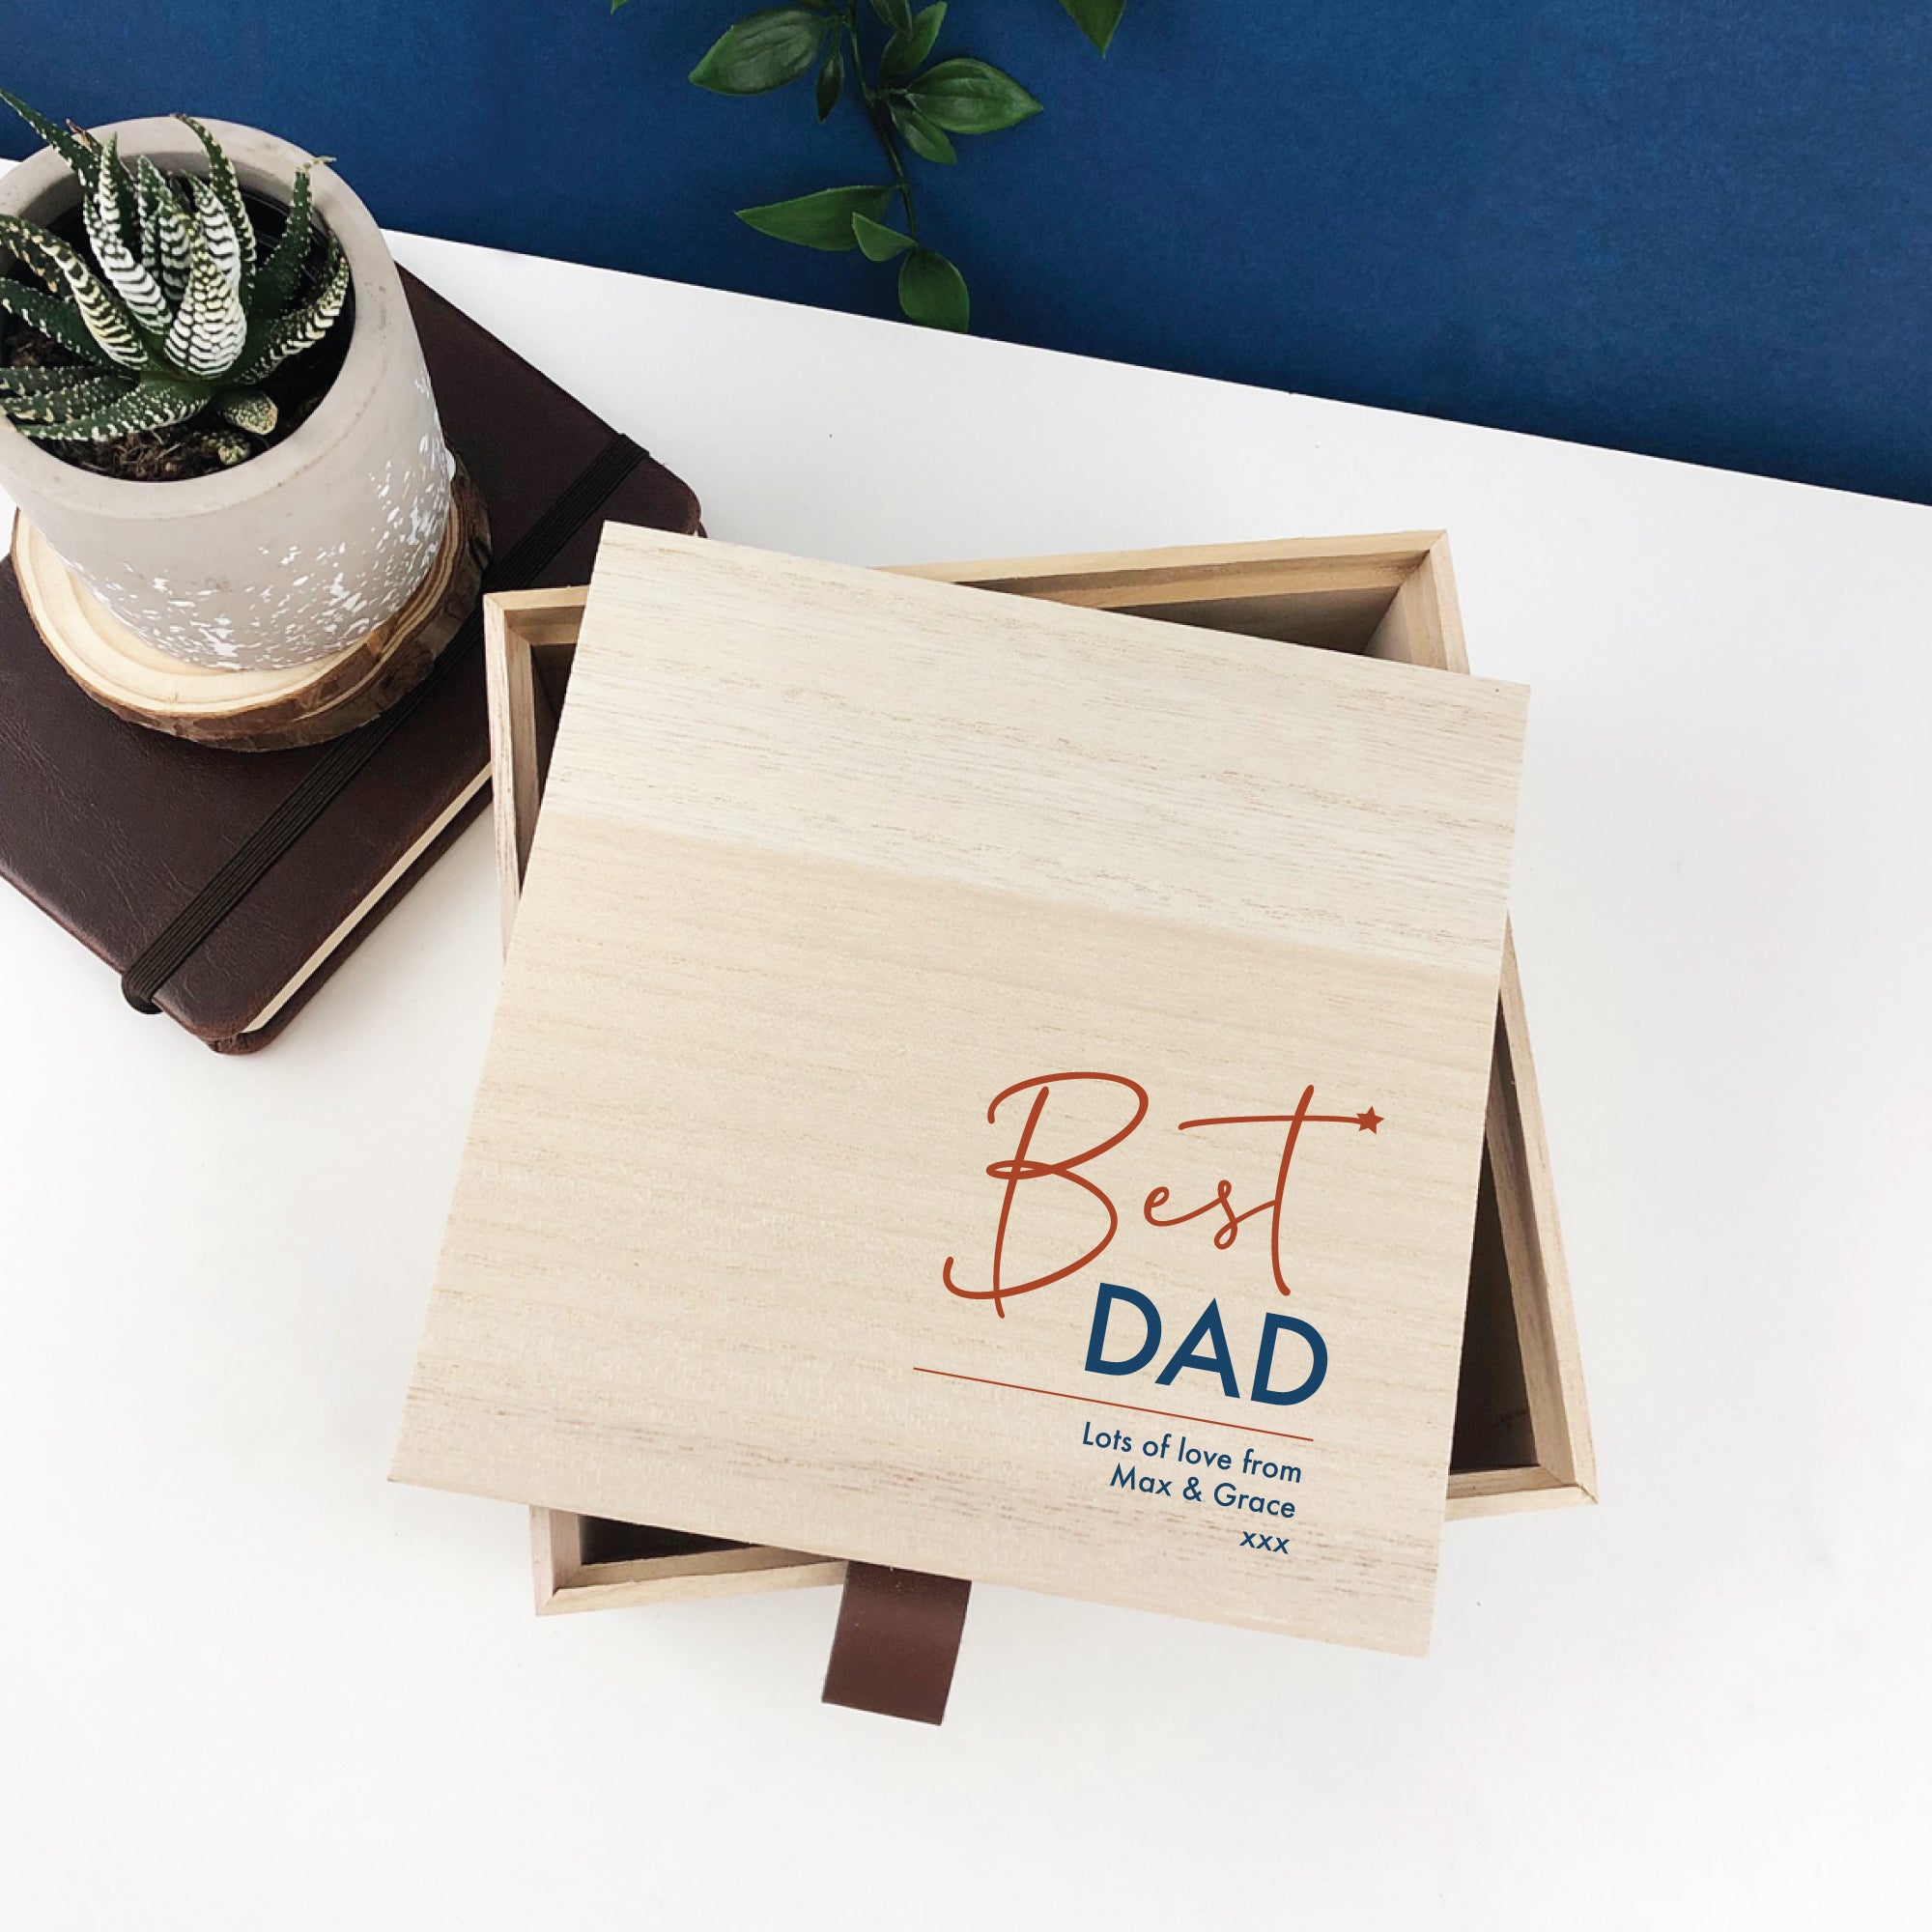 Personalised Best Dad Keepsake Box with Tab (limited quantities)